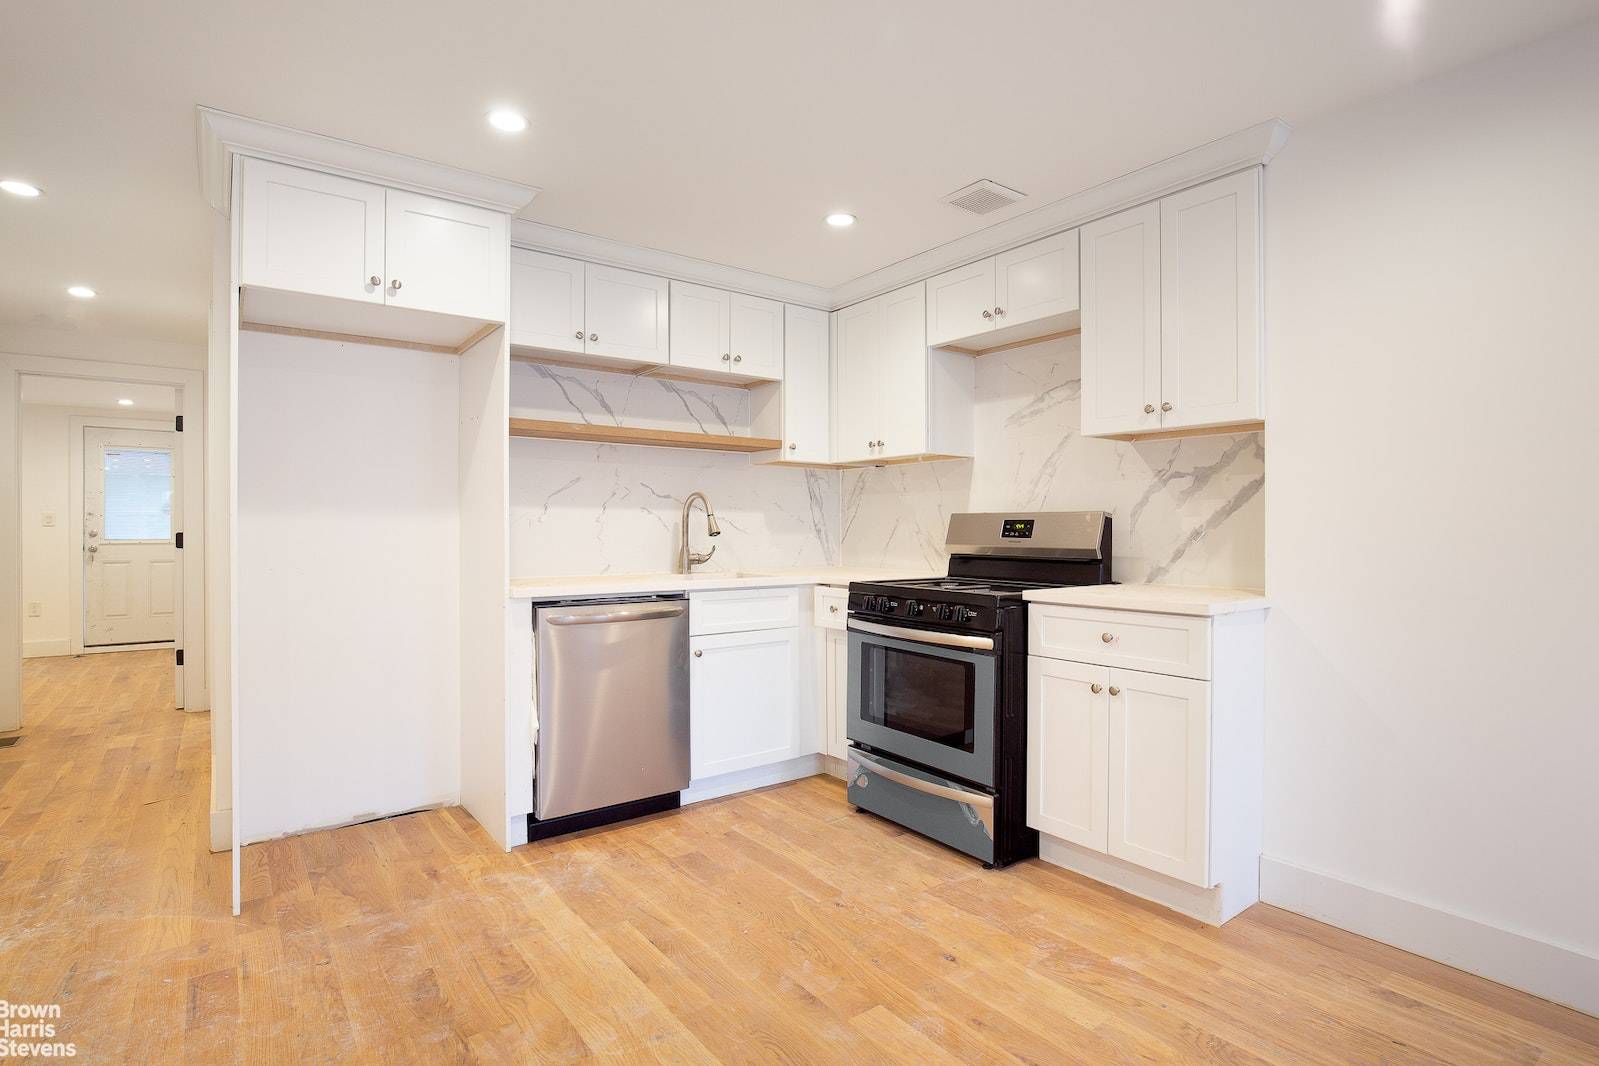 Renovated 3 bedroom, 1. 5 bathroom duplex with private patio on a townhouse block in Bushwick.